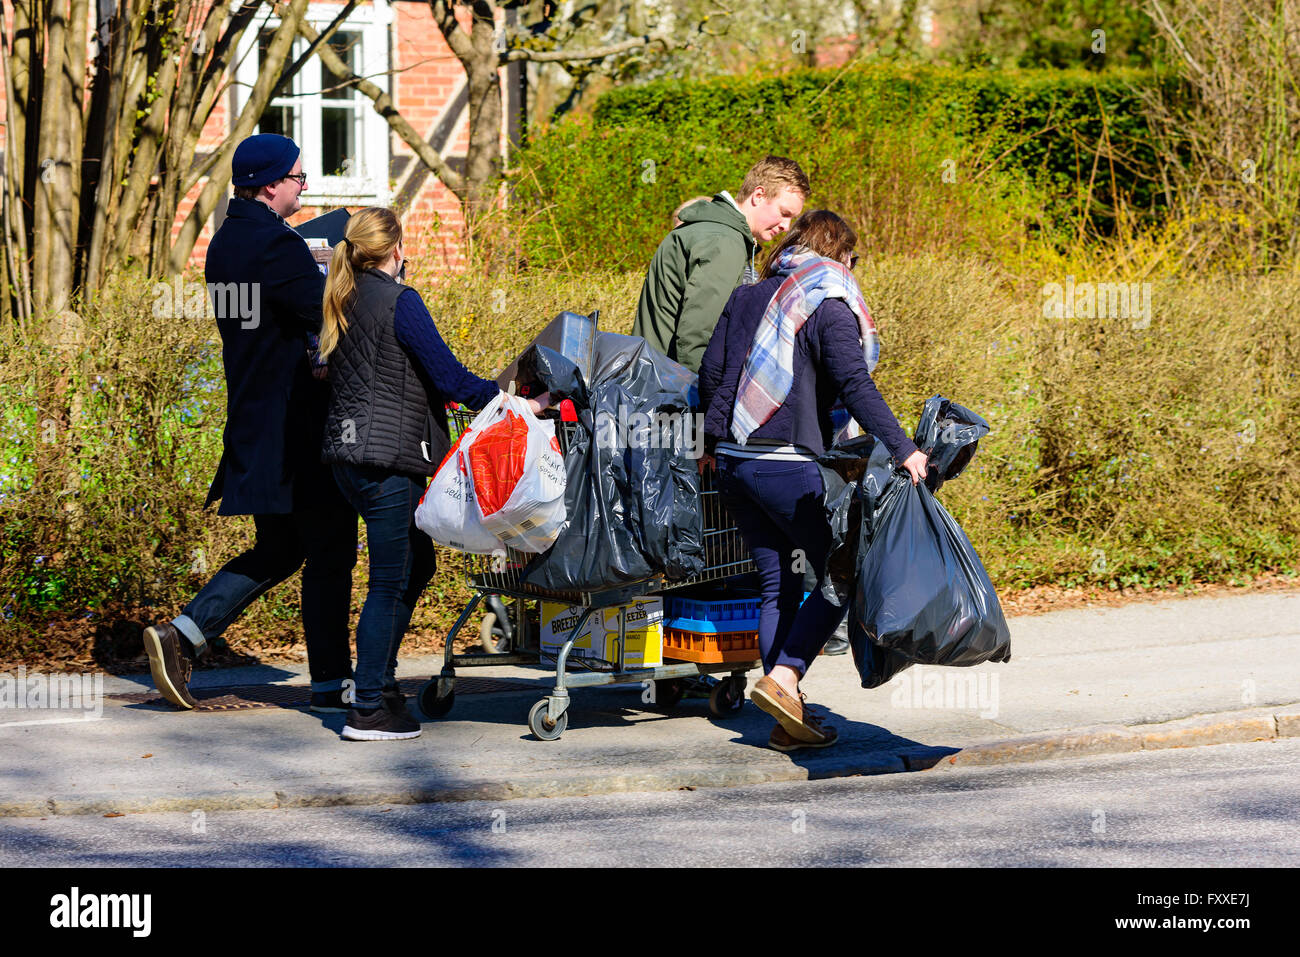 Lund, Sweden - April 11, 2016: Real life in the city. Some young adult persons help each other to move stuff with a shopping car Stock Photo